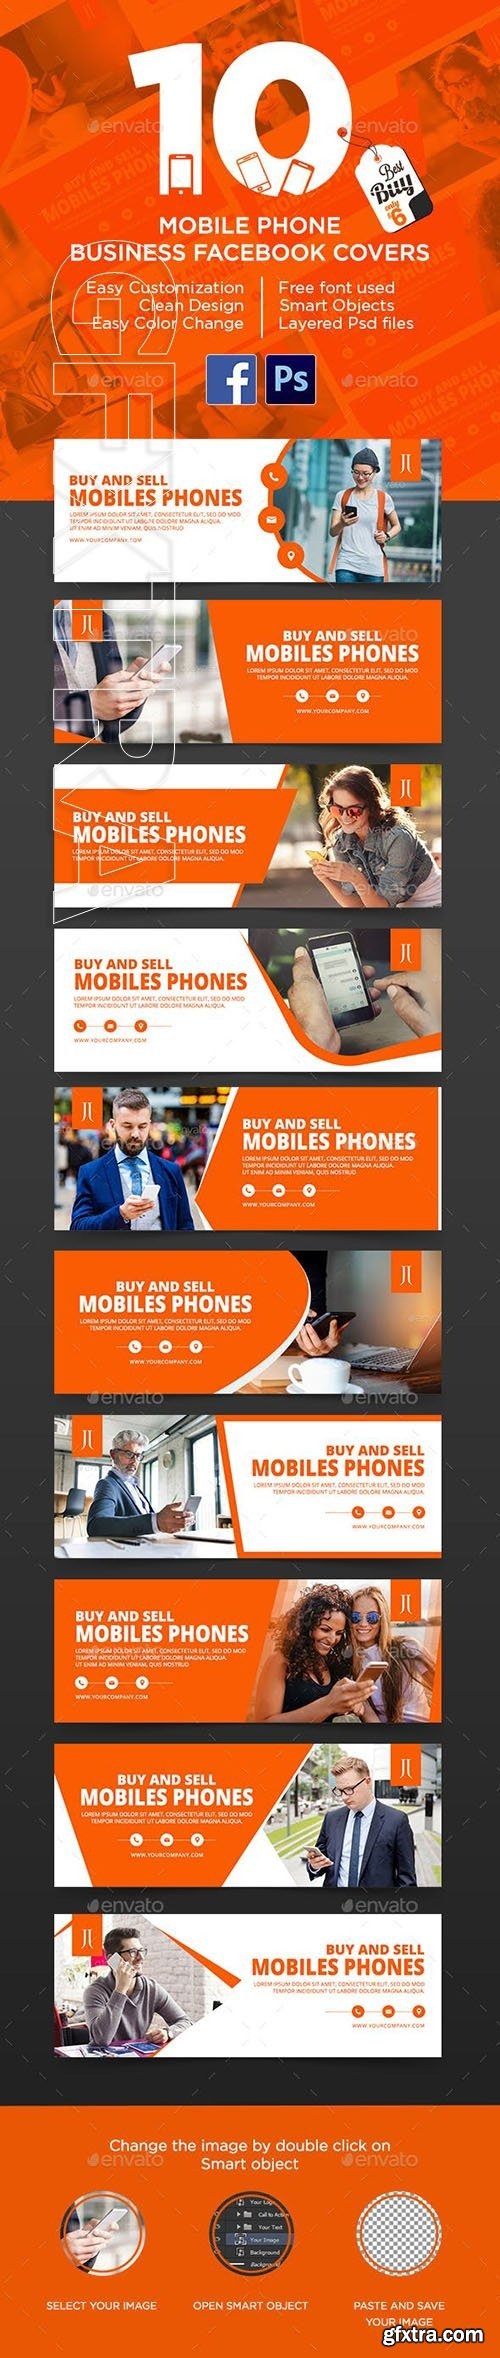 GraphicRiver - Mobile Phone Business Facebook Covers 23631618